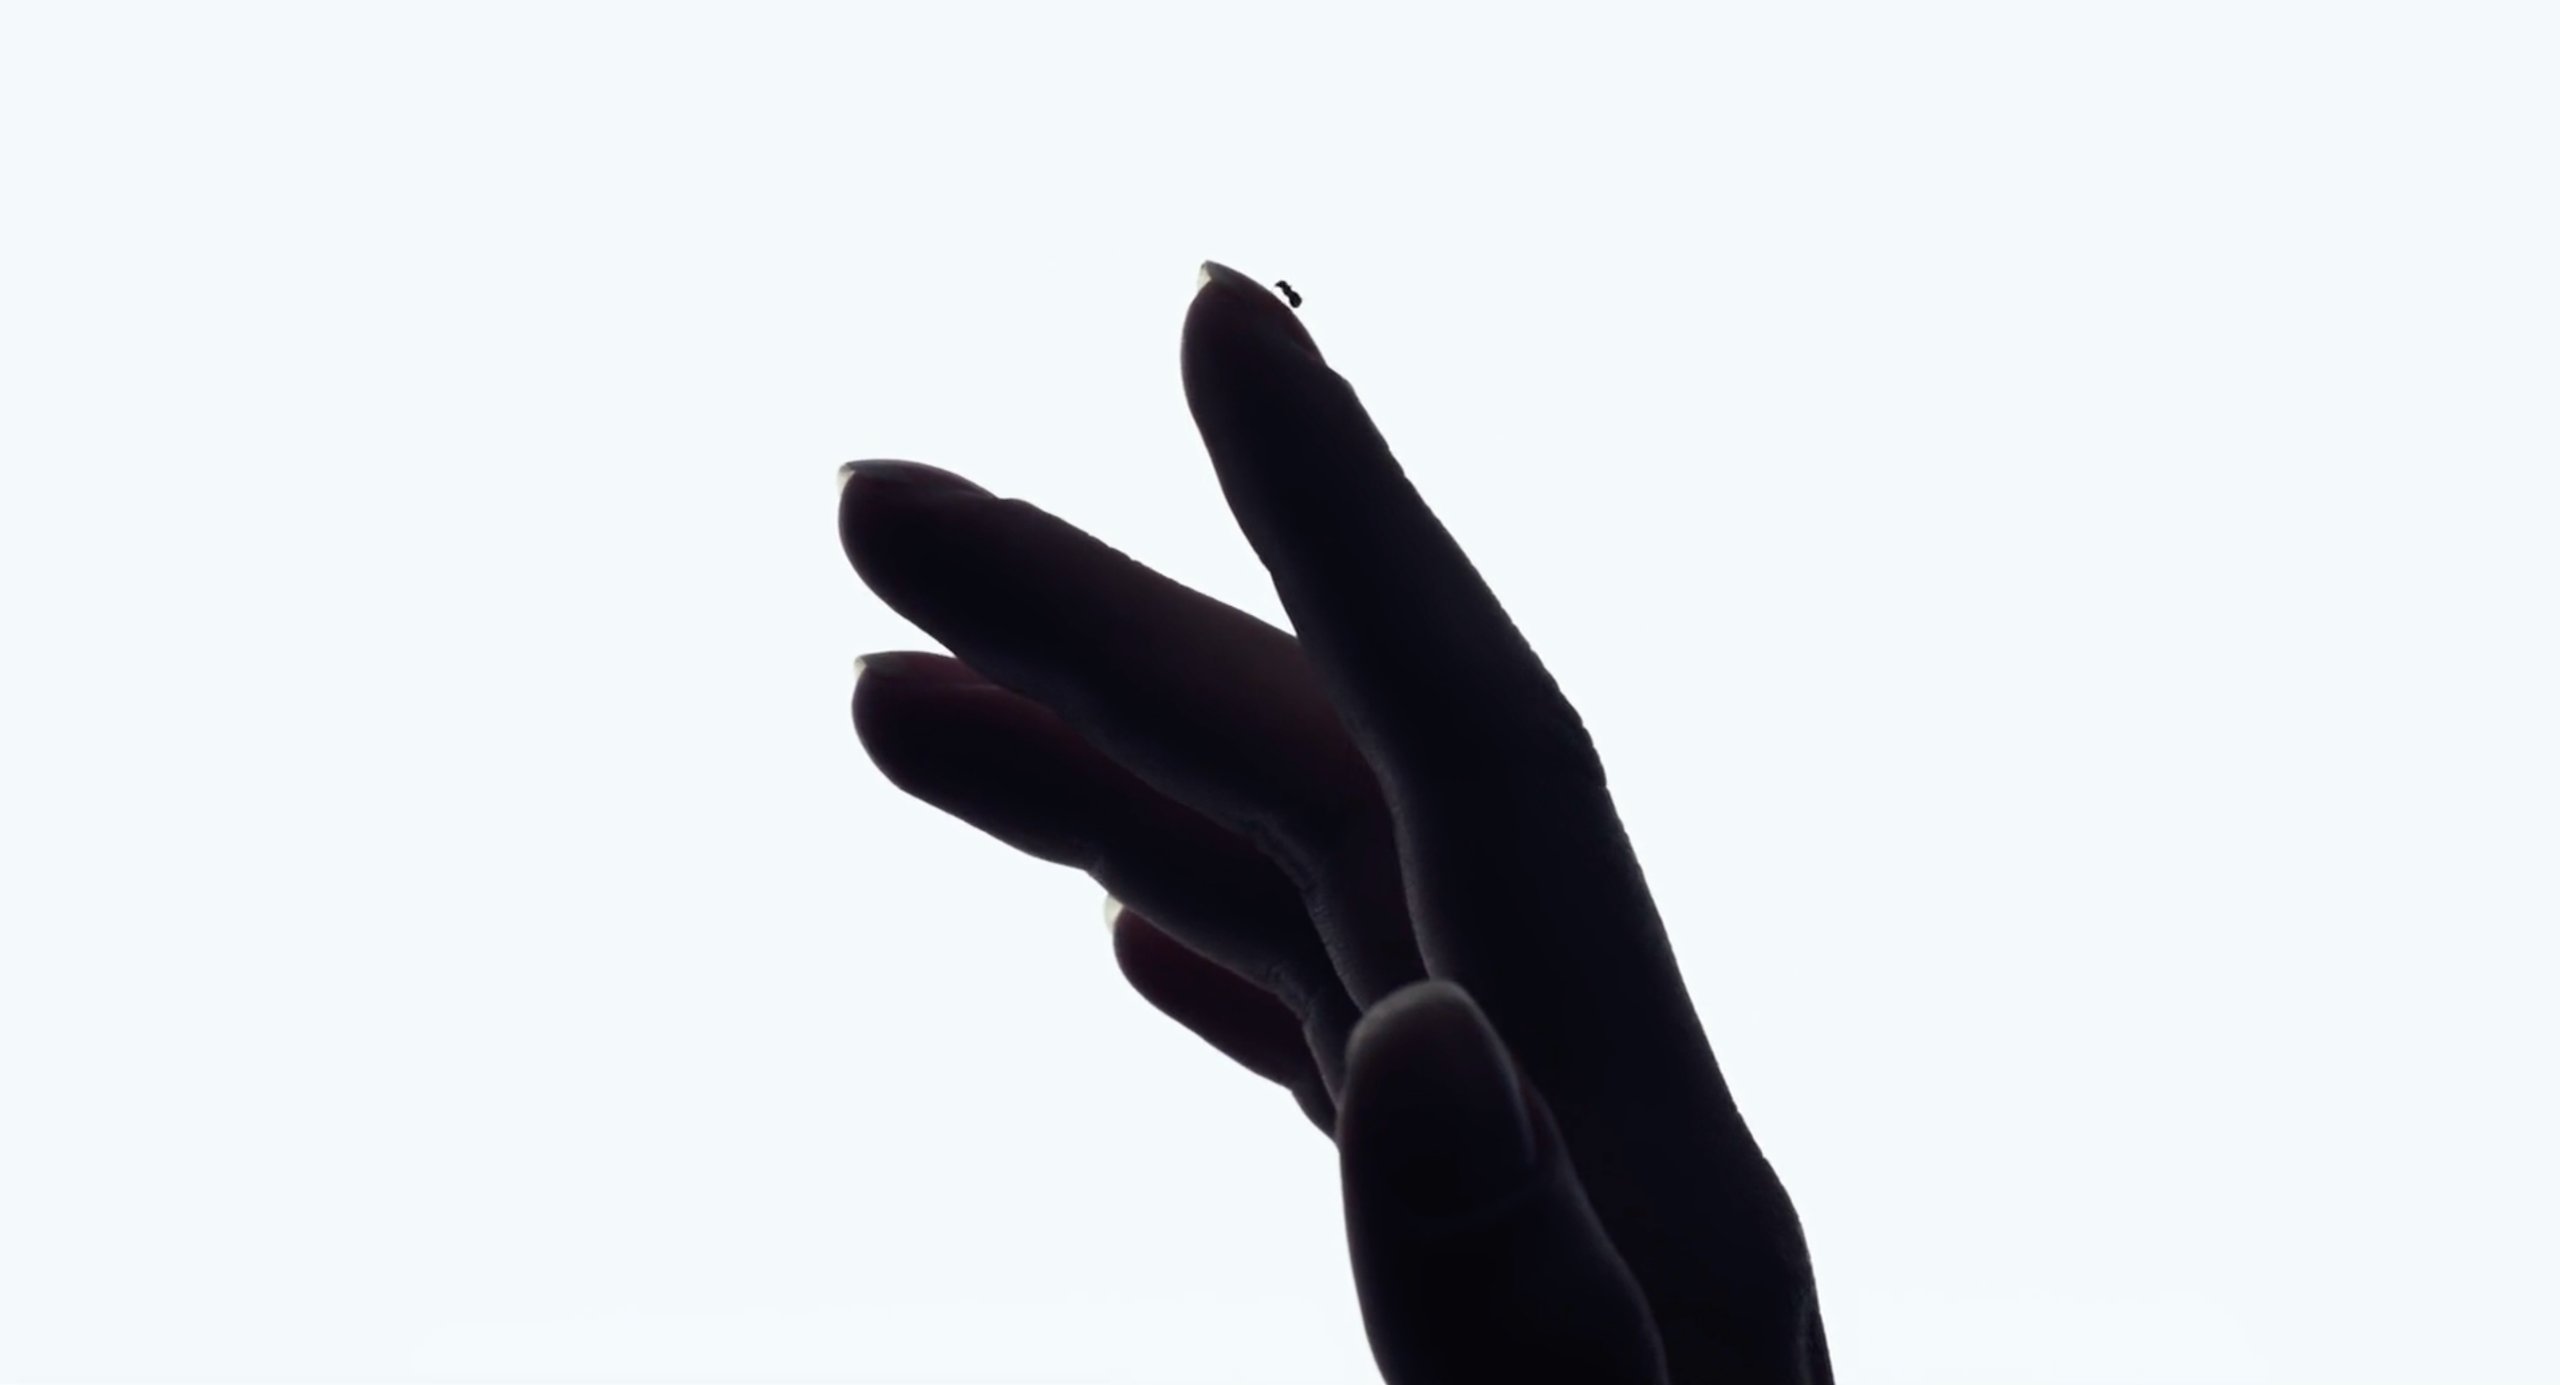 An ant crawls on Scarlett Johansson's hand at the beginning of Under the Skin